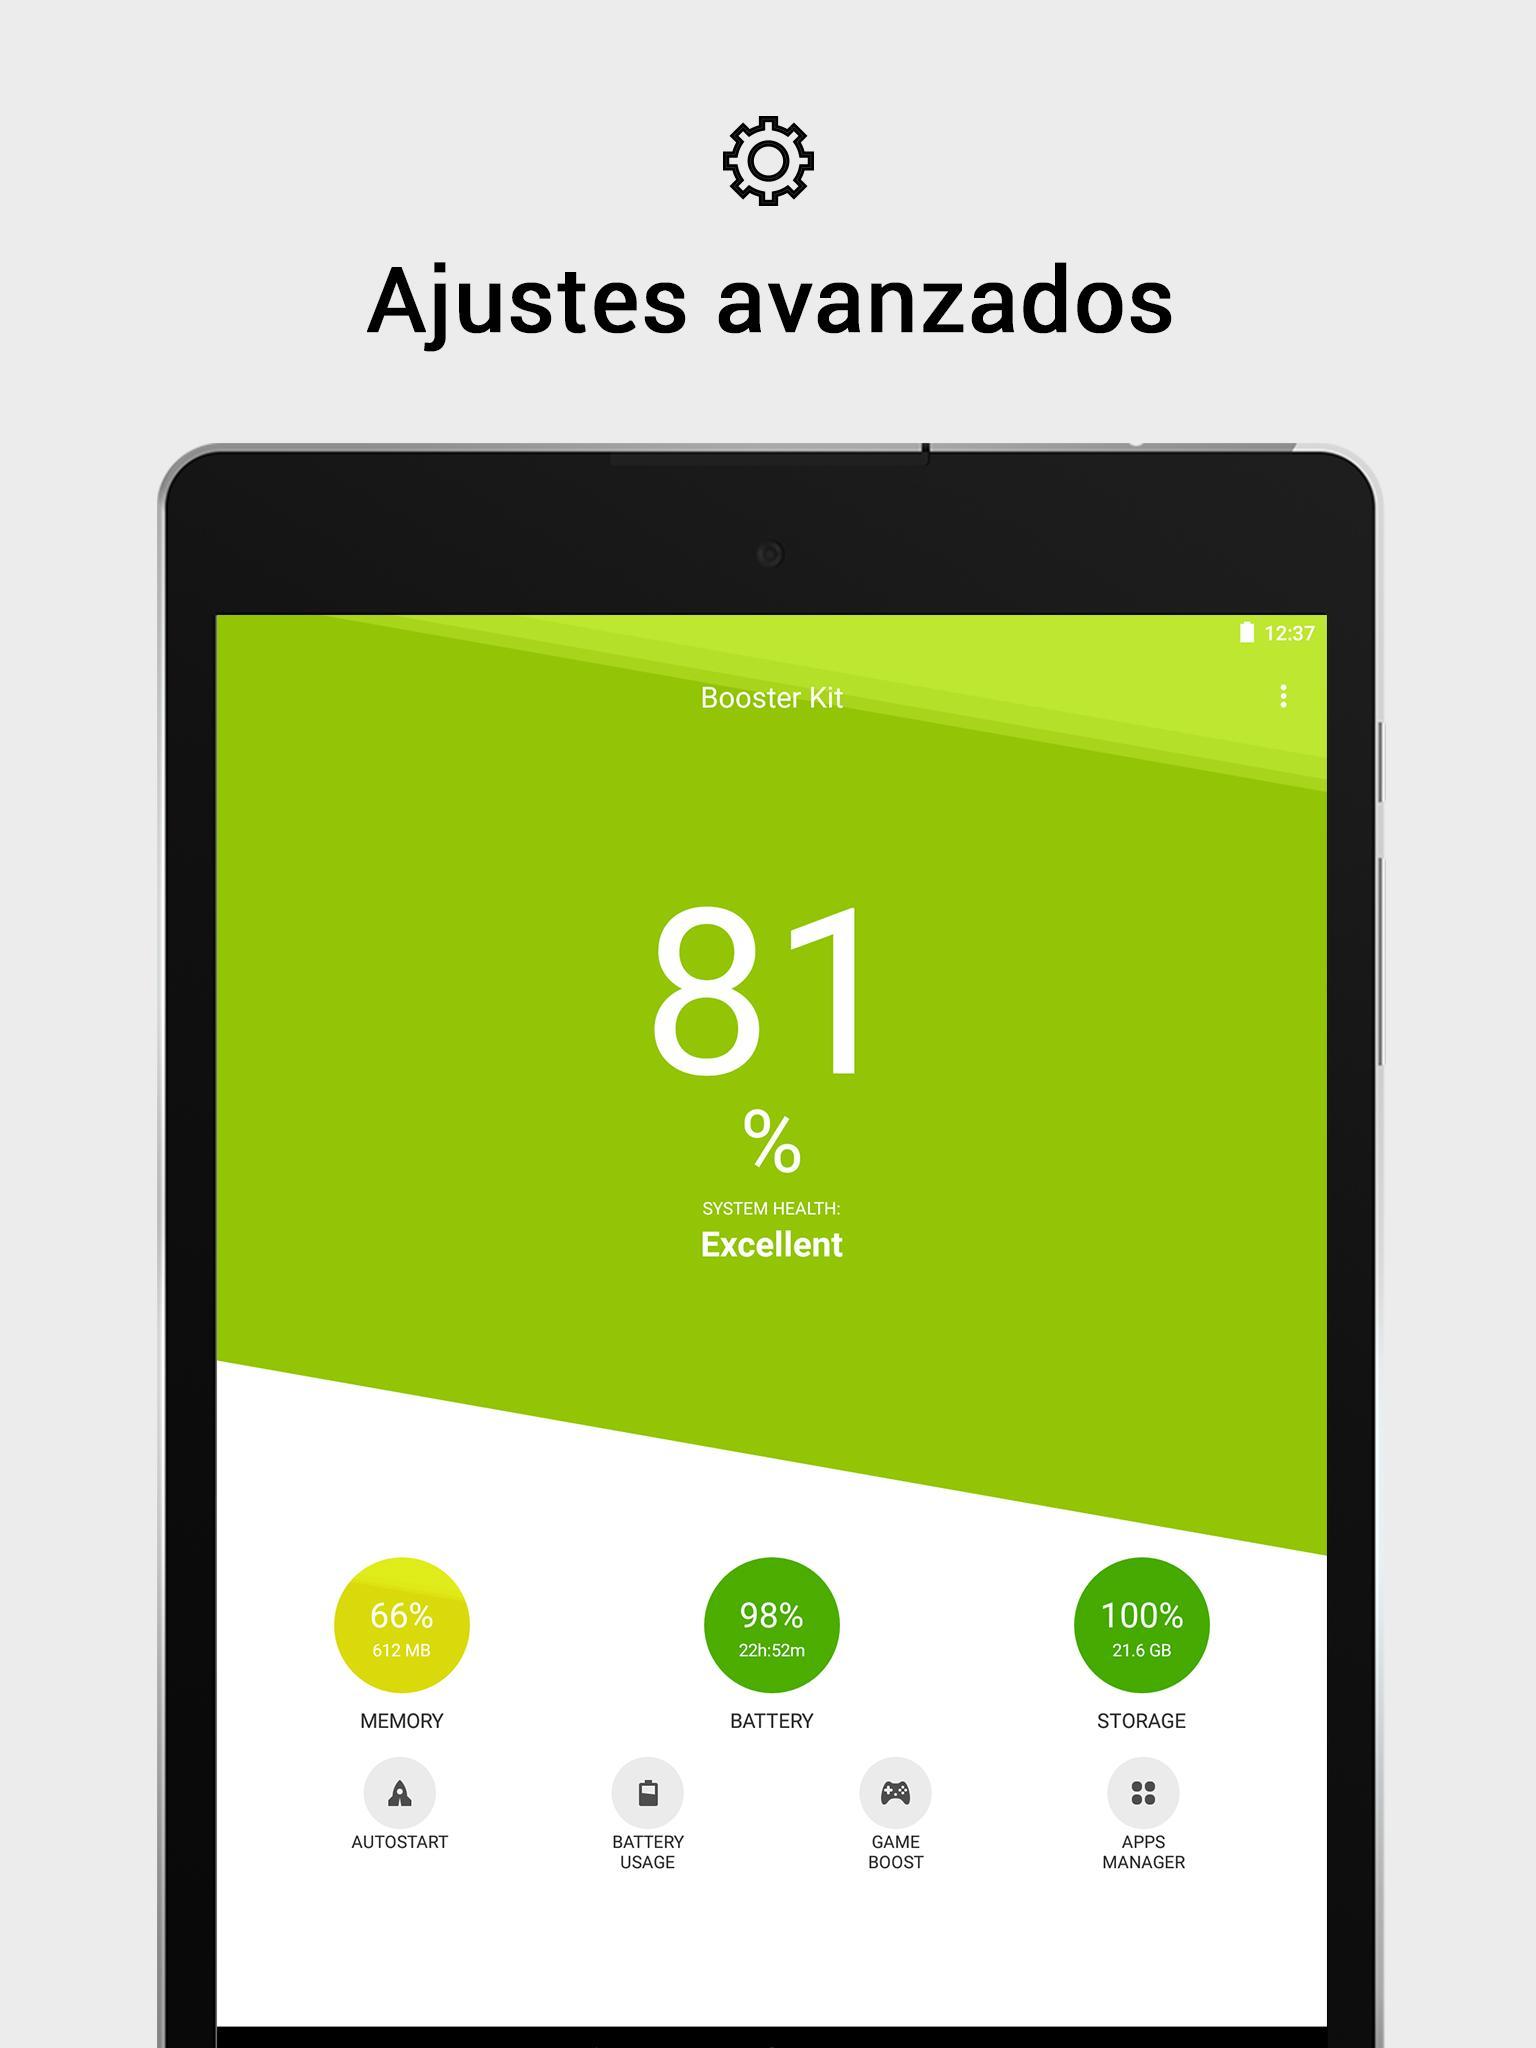 Optimizador - Booster Kit for Android - APK Download